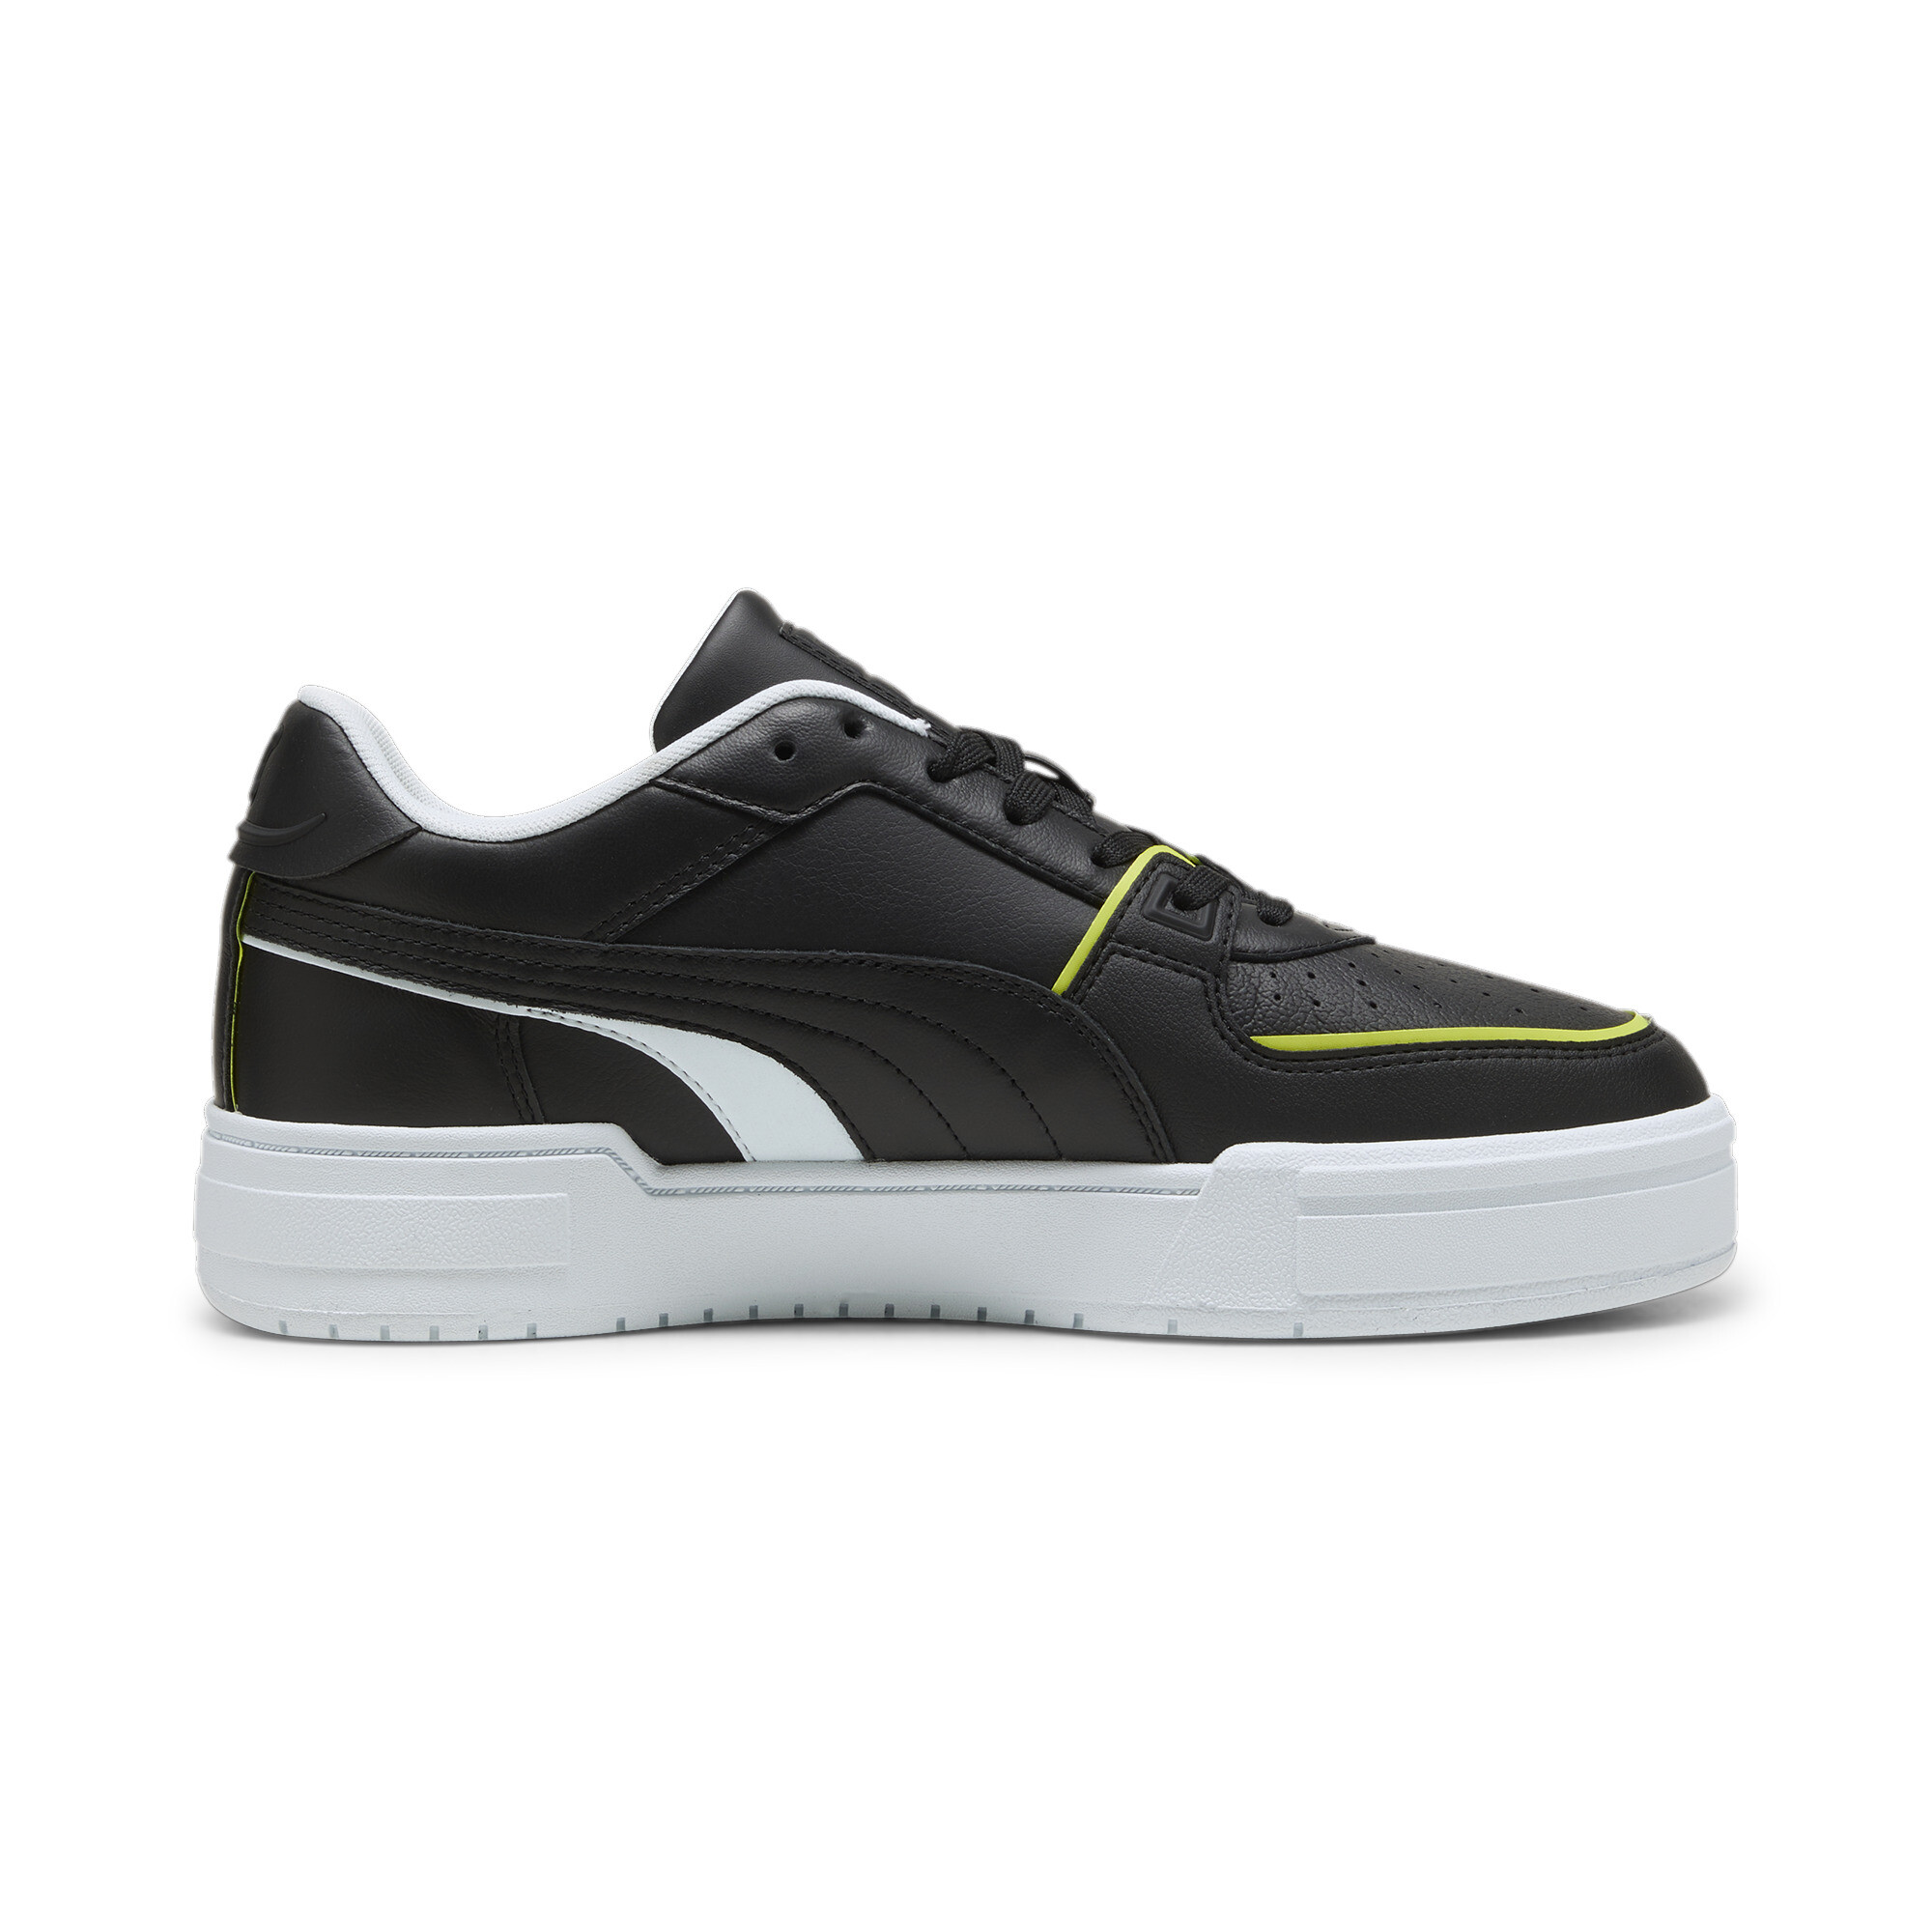 Puma AMG CA Pro Sneakers, Black, Size 36, Shoes